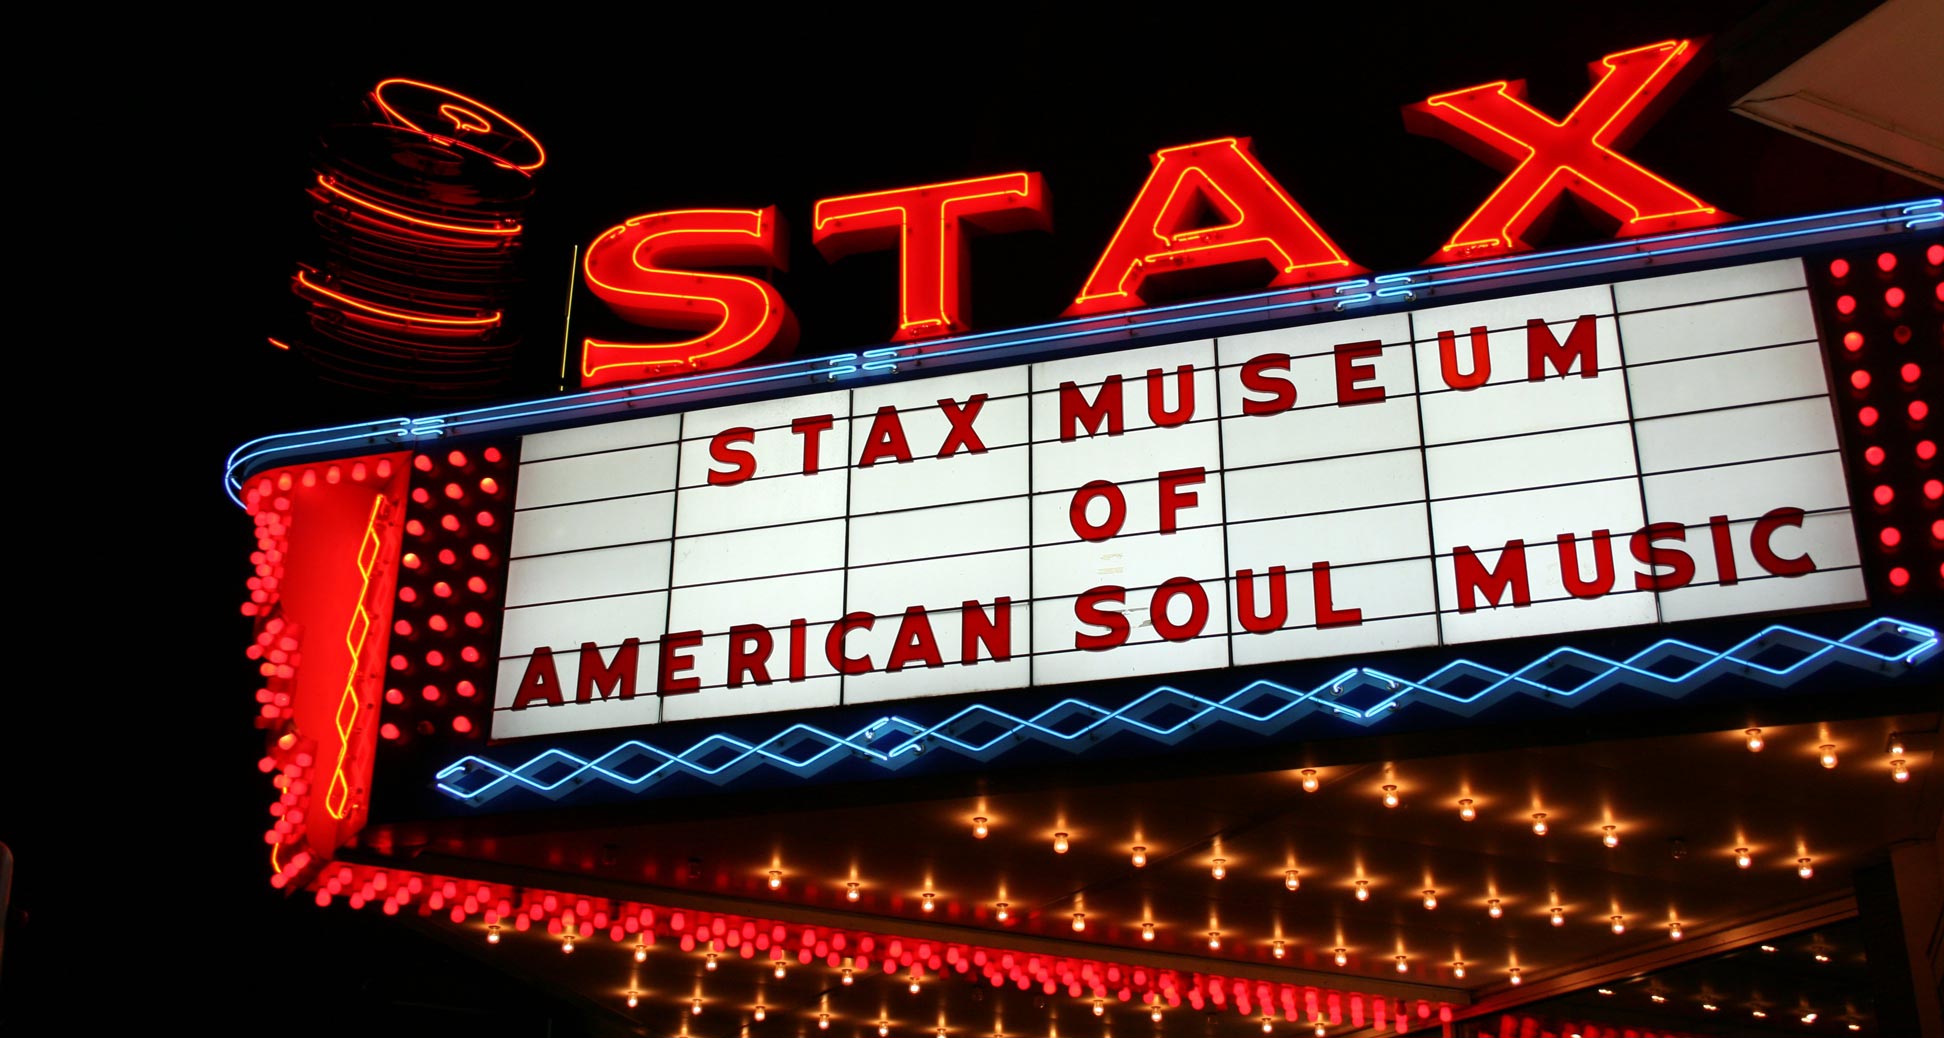 The Stax Museum of American Soul Music is located in in Memphis, Tennessee